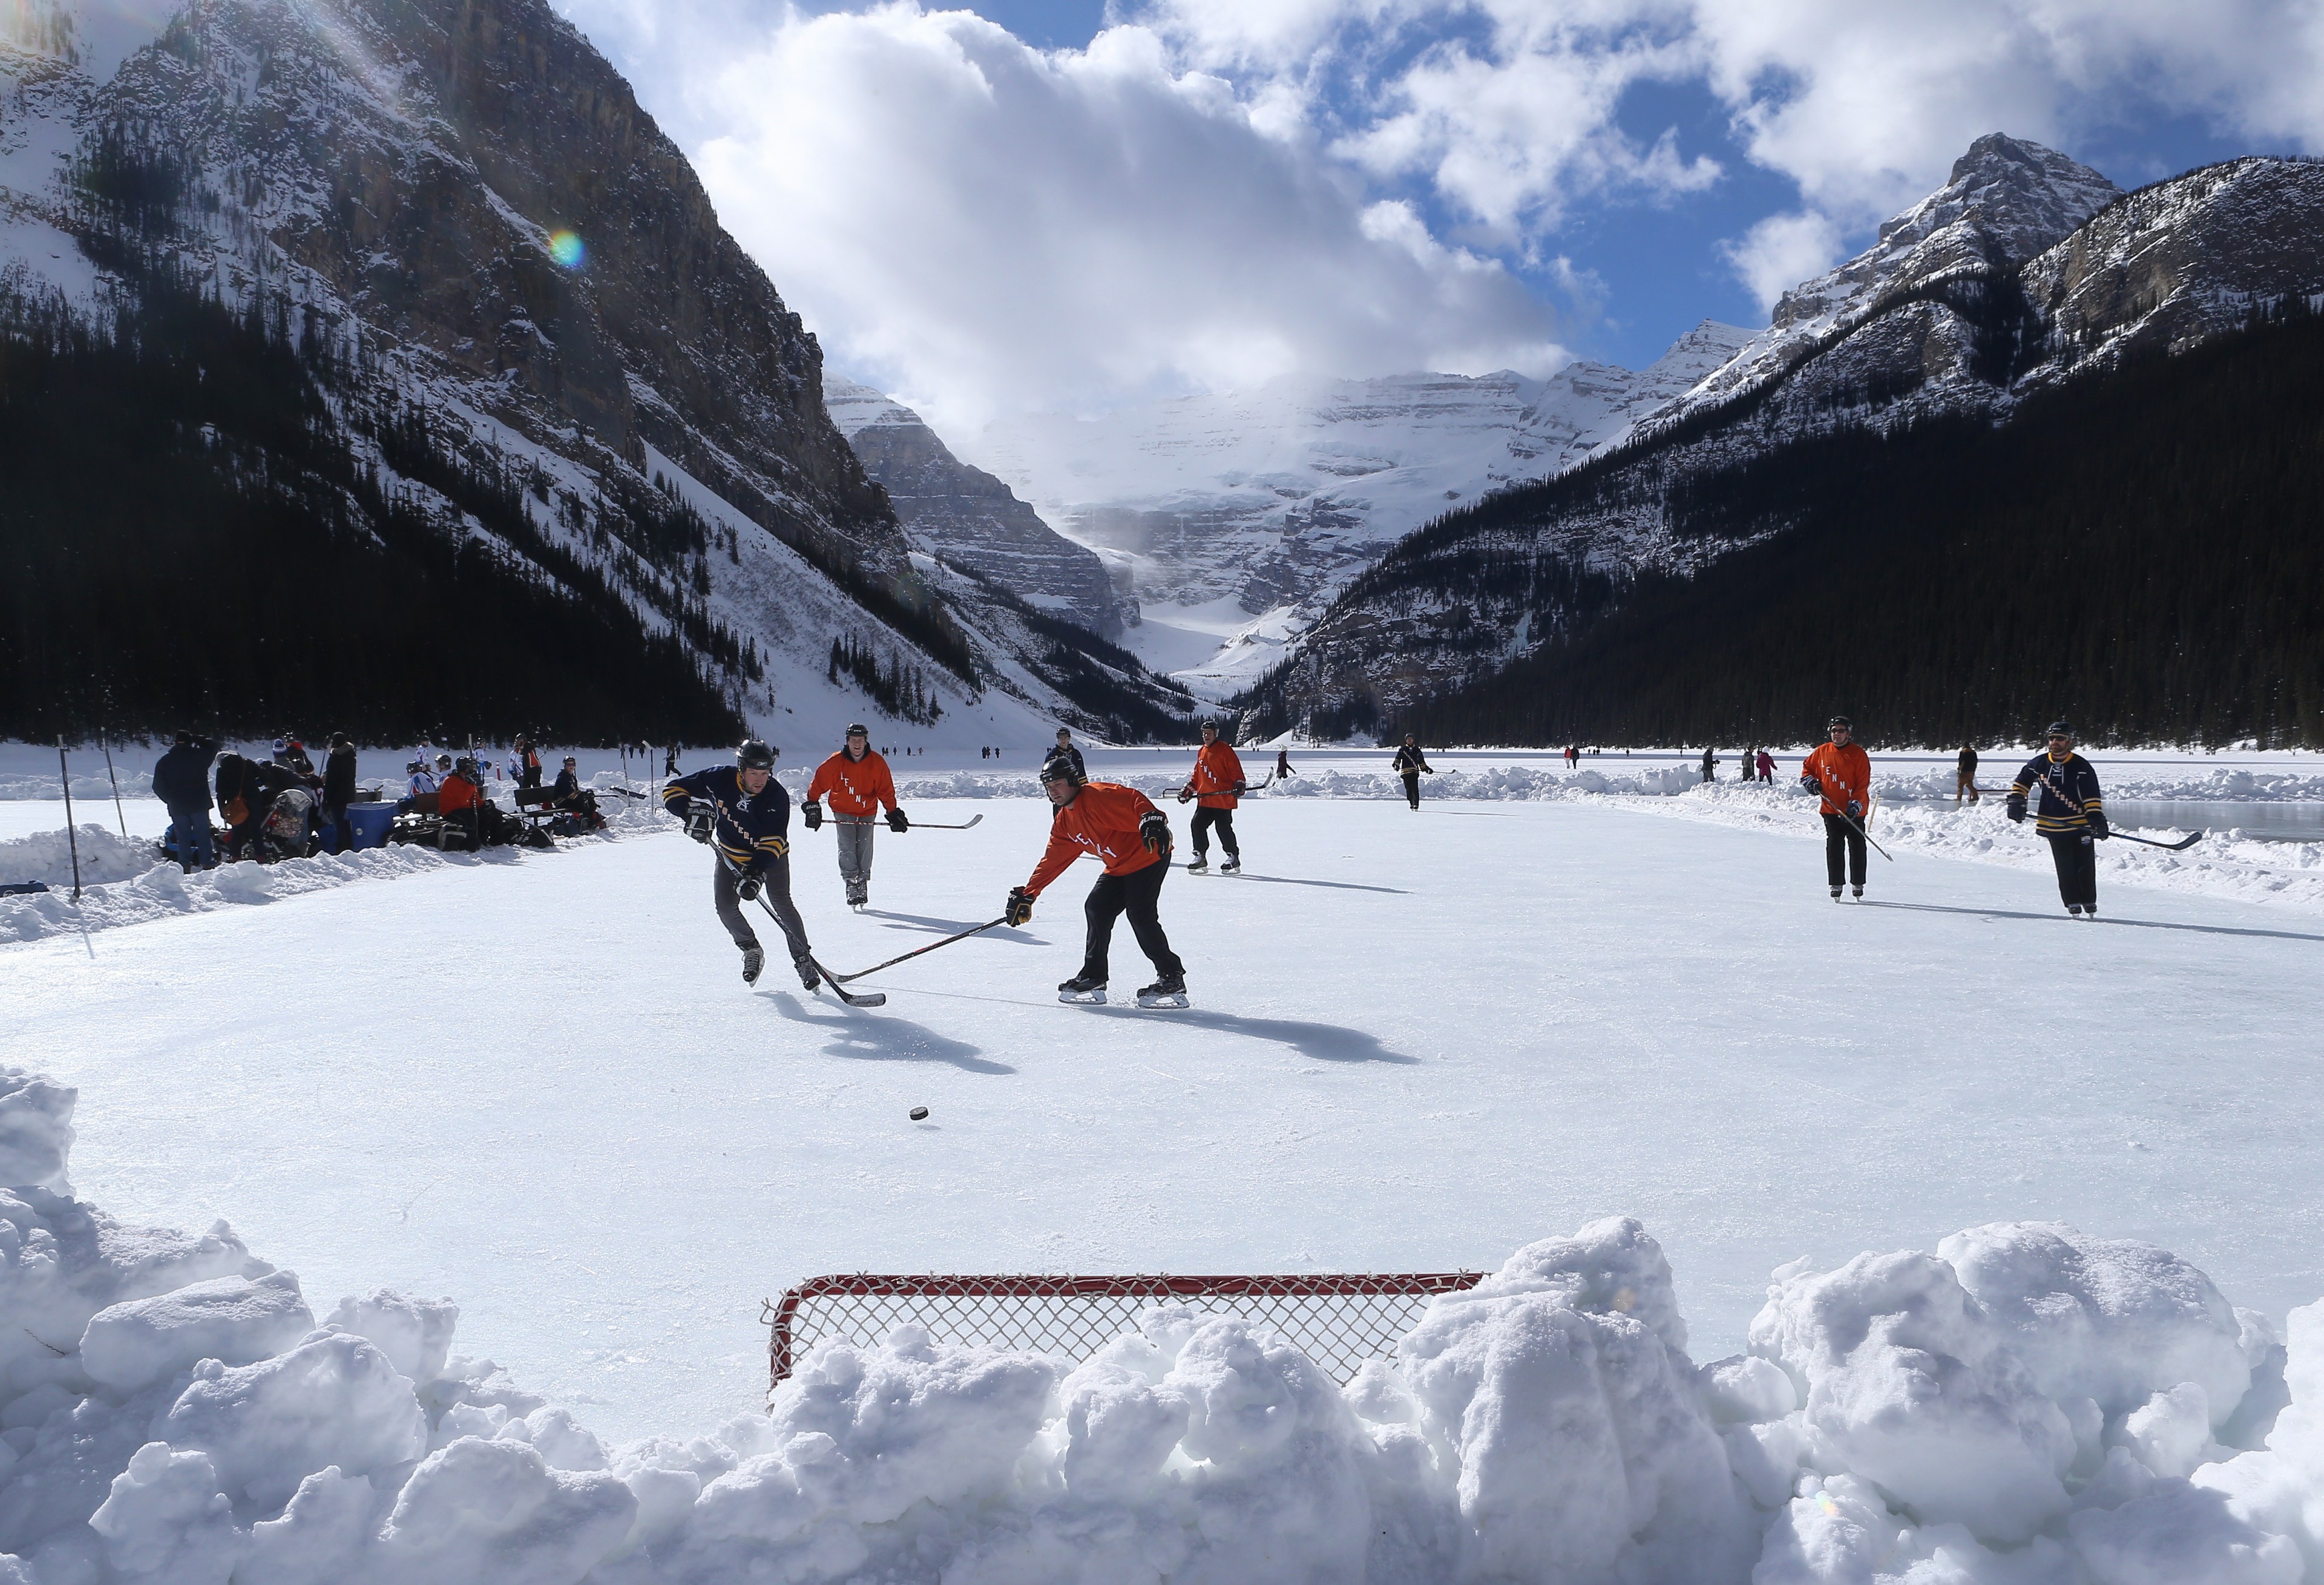 Outdoor shinny hockey action during the 7th Annual Lake Louise Pond Hockey Classic on the frozen surface of Lake Louise on February 27, 2016 in Lake Louise, Alberta, Canada.